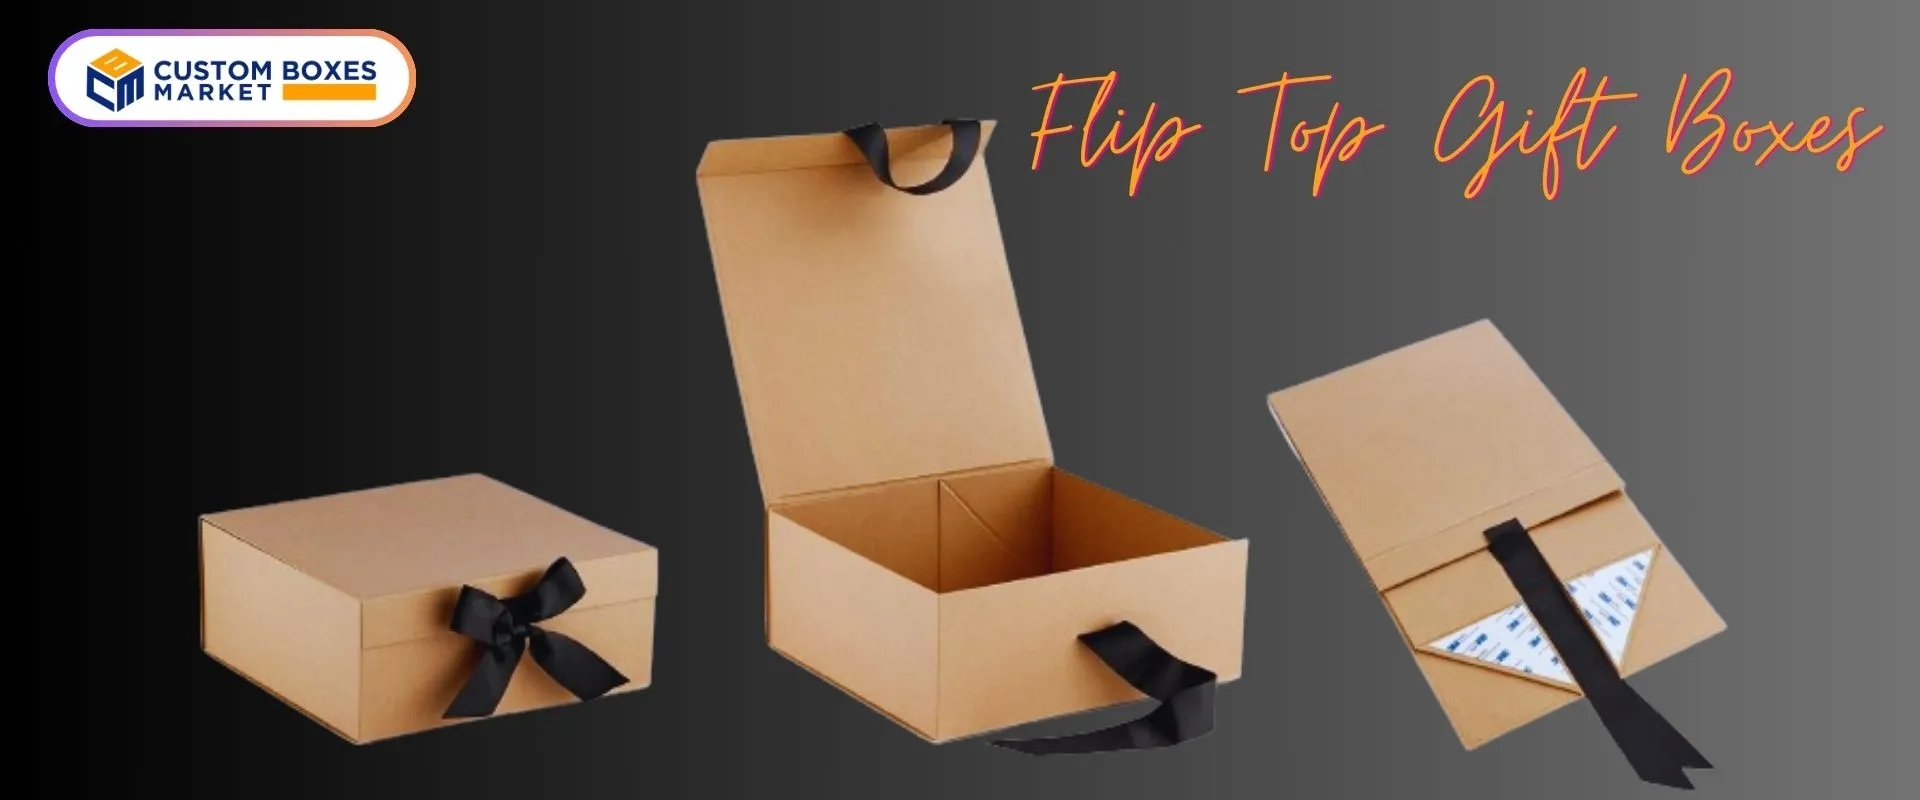 Flip-Top-Gift-Boxes